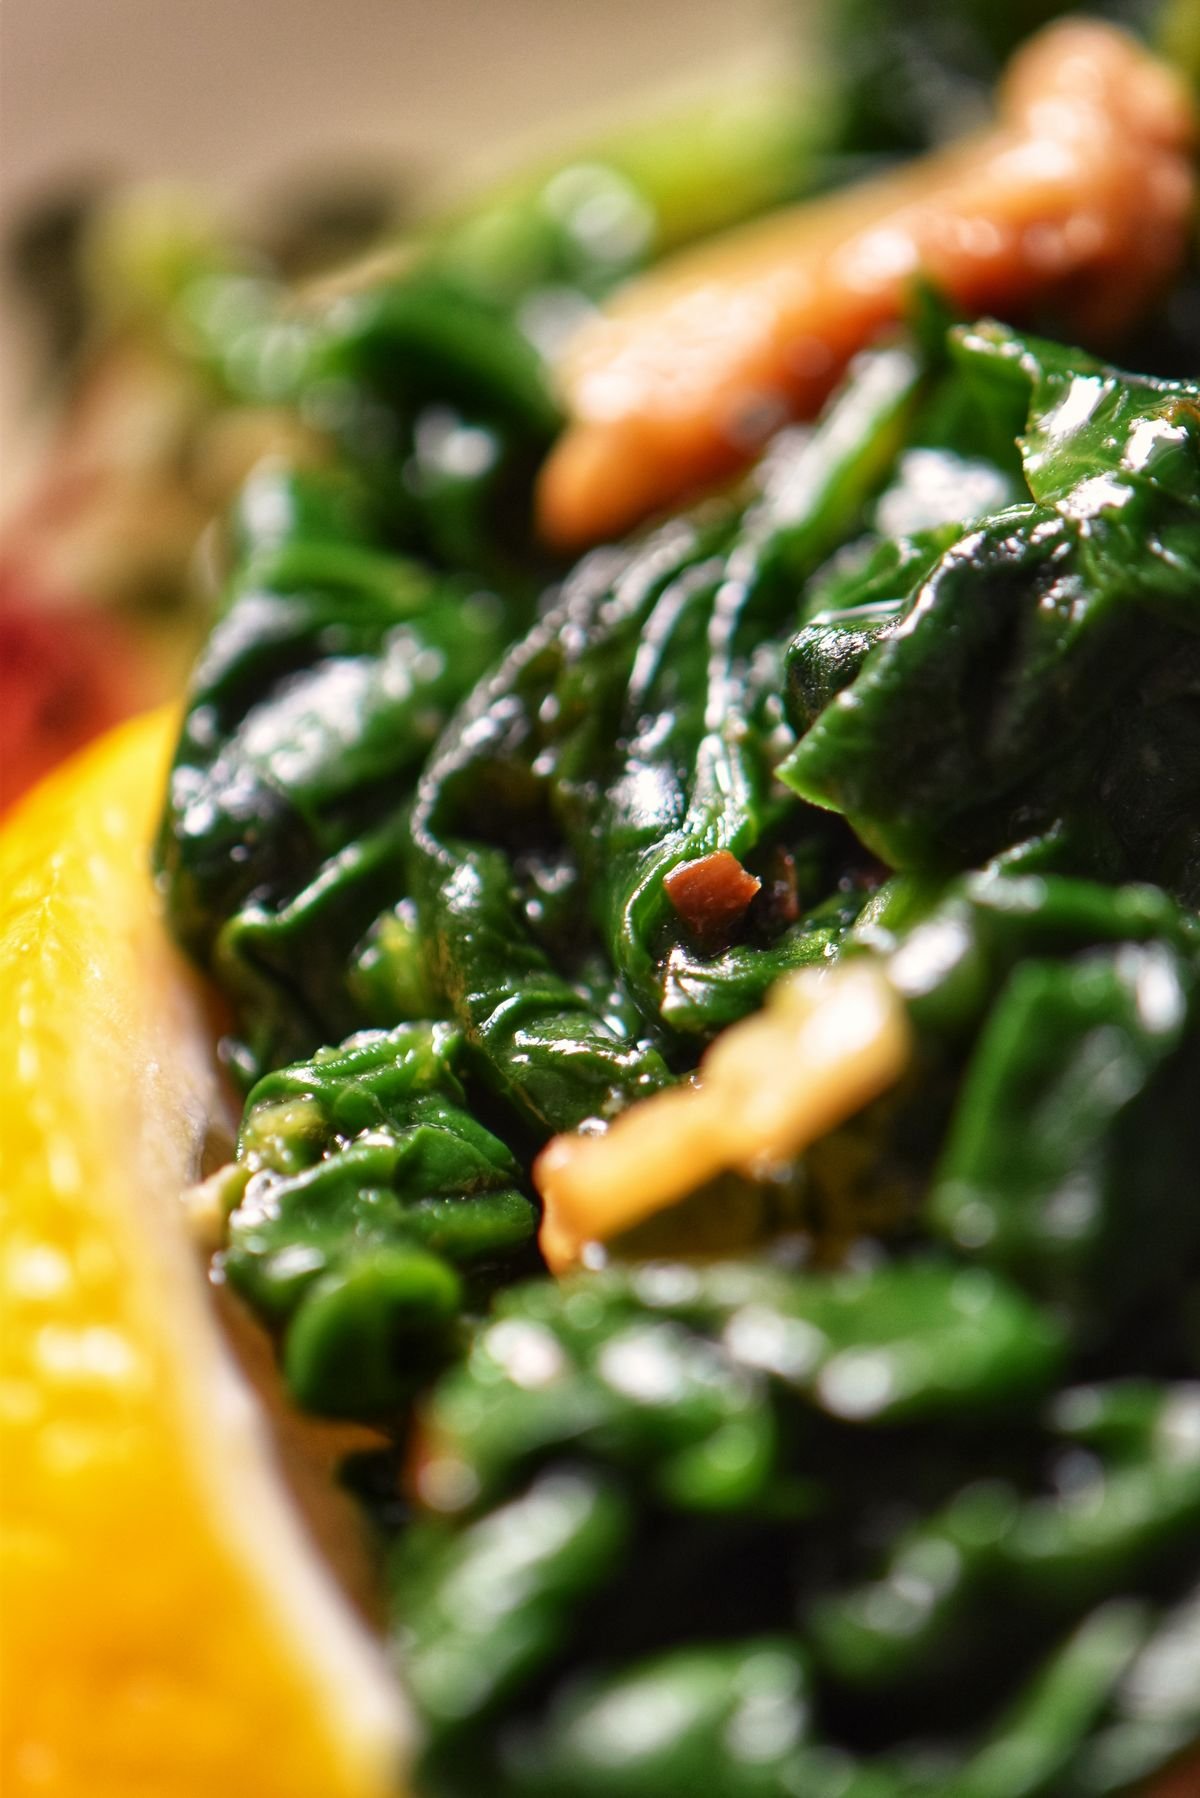 A close up photo of cooked spinach.